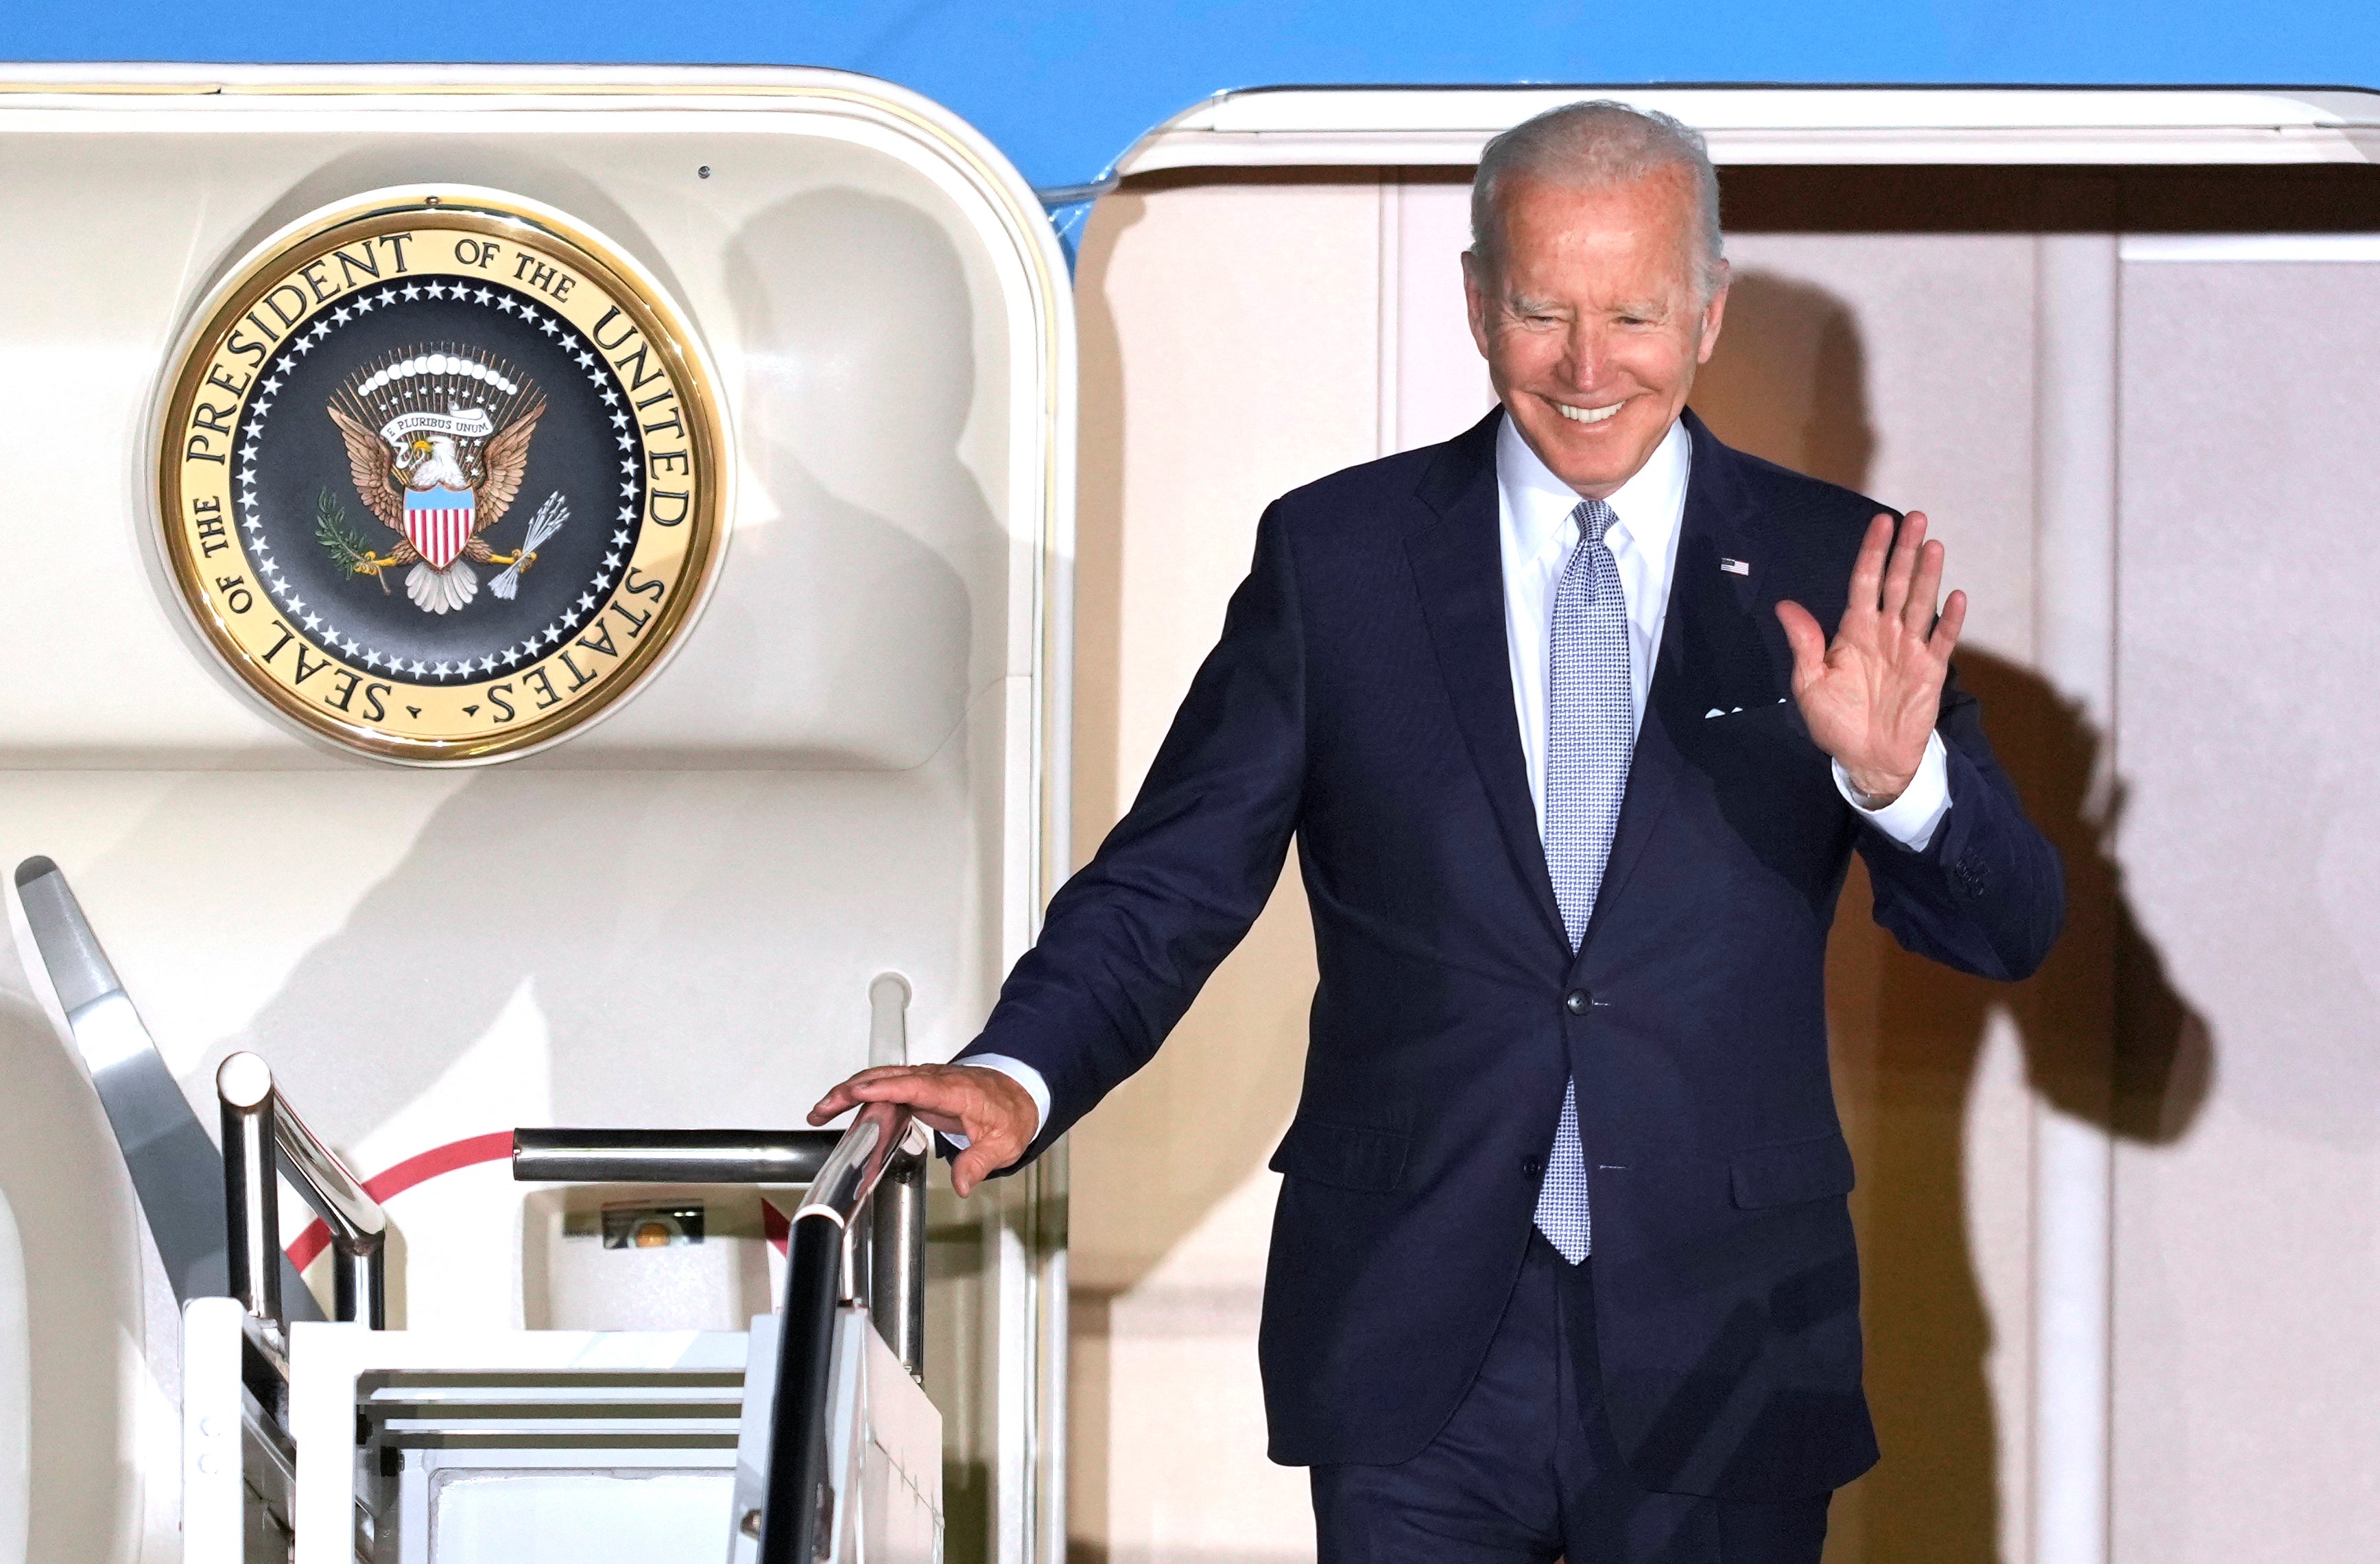 The coming days might not be the easiest for Joe Biden